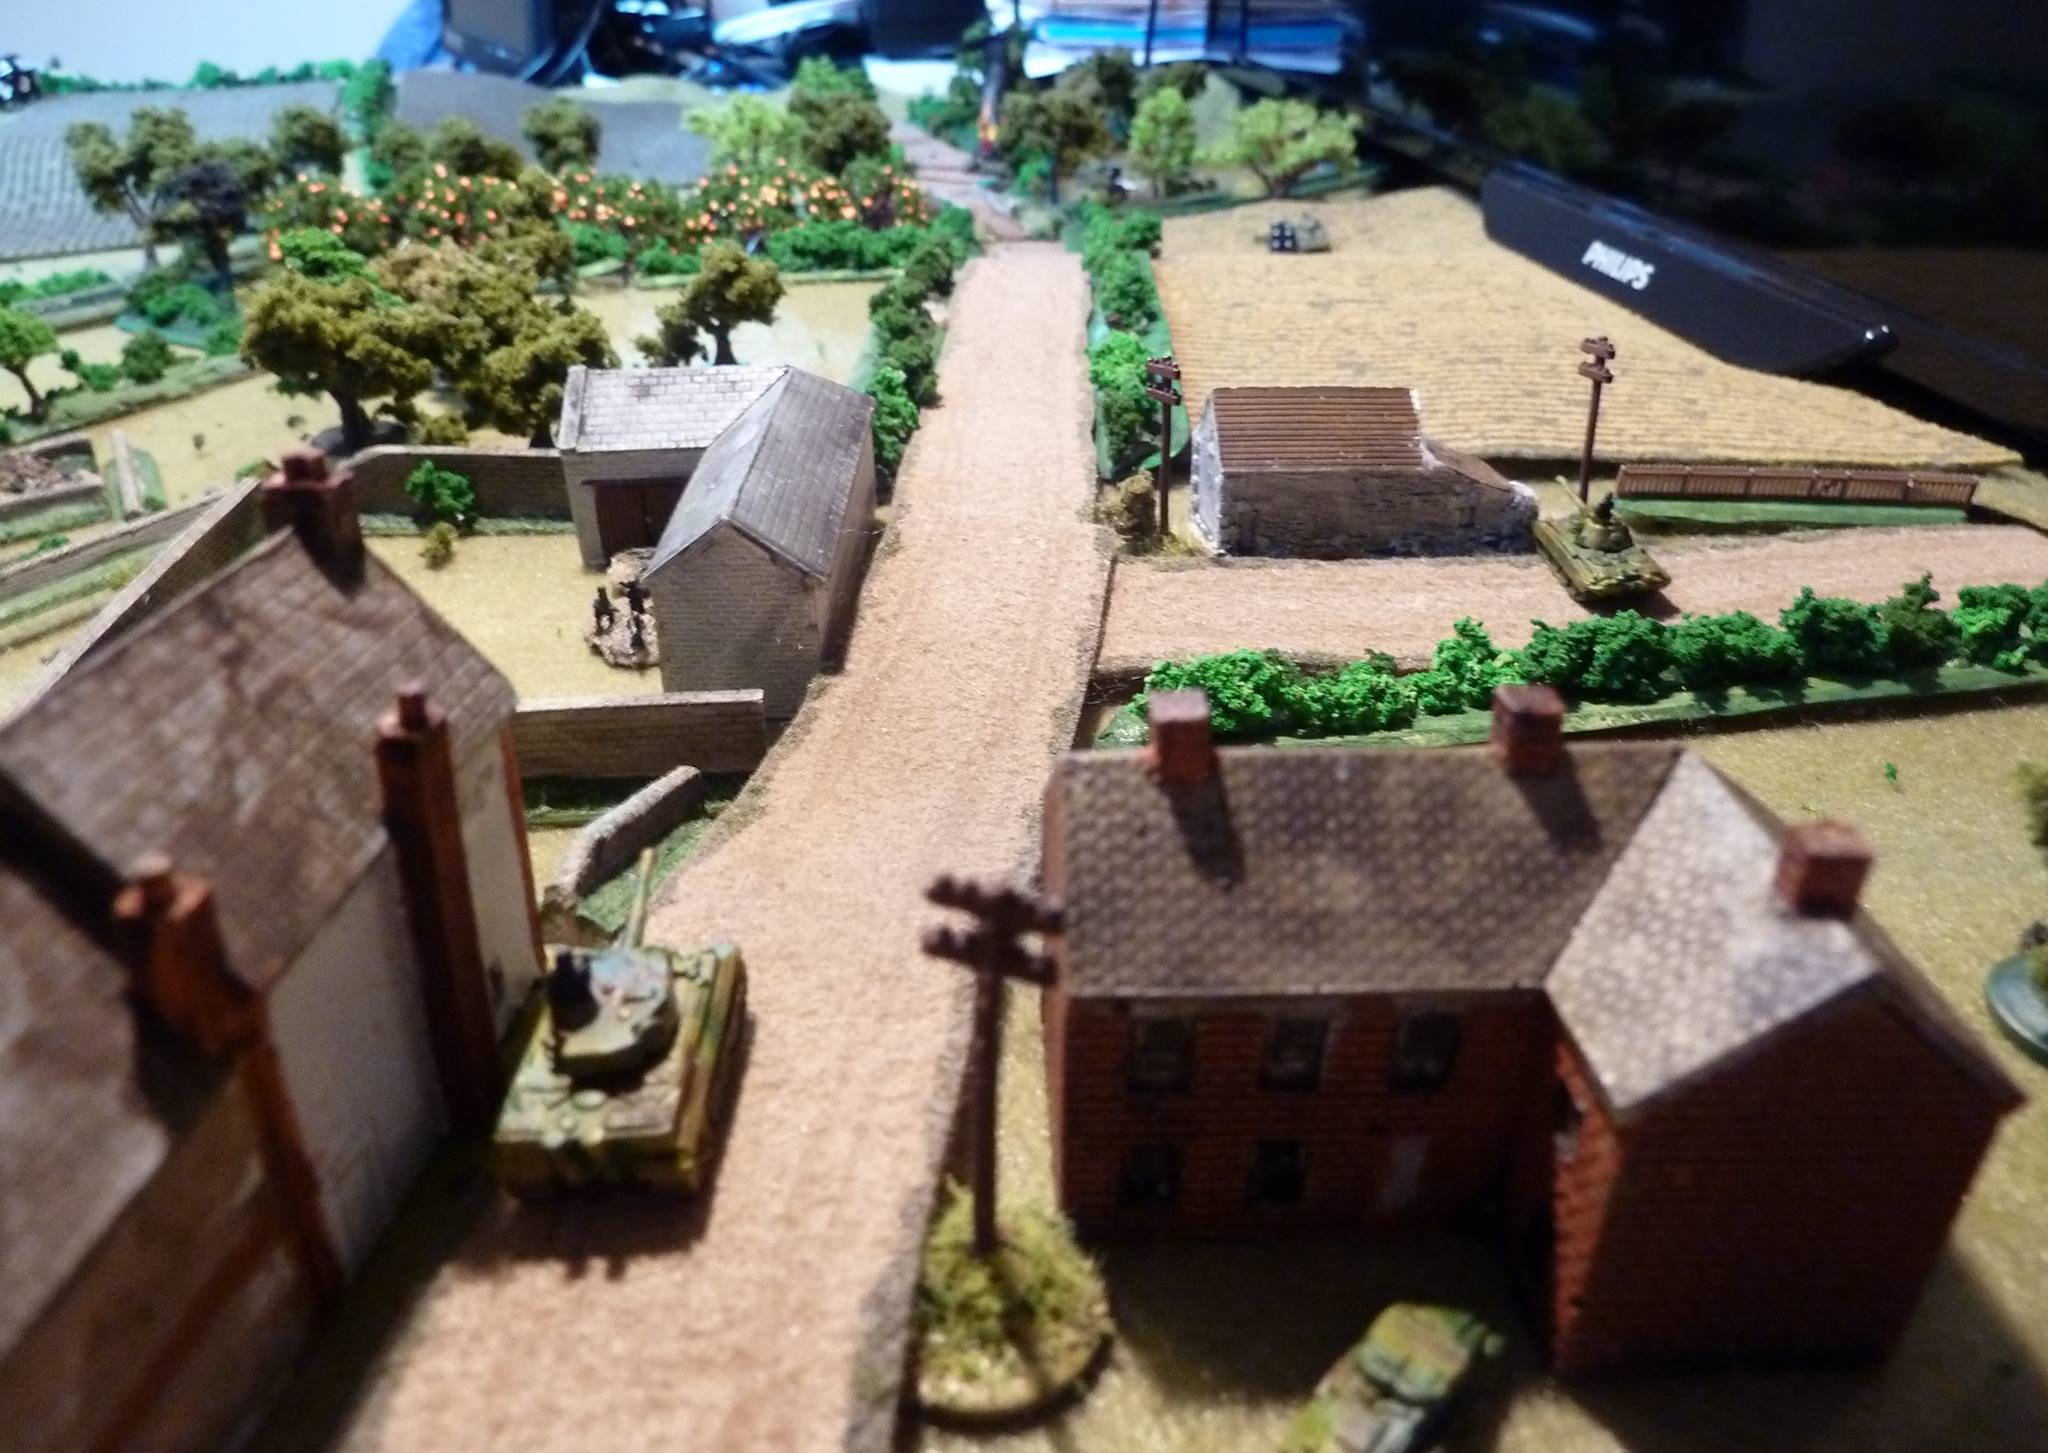  The view from Lambert down the top road. The Panther has moved forward to cover the fields. The Tiger covers the road with the burning M4 visible. Another Sherman in the field has been hit repeatedly and the crew bailed. 